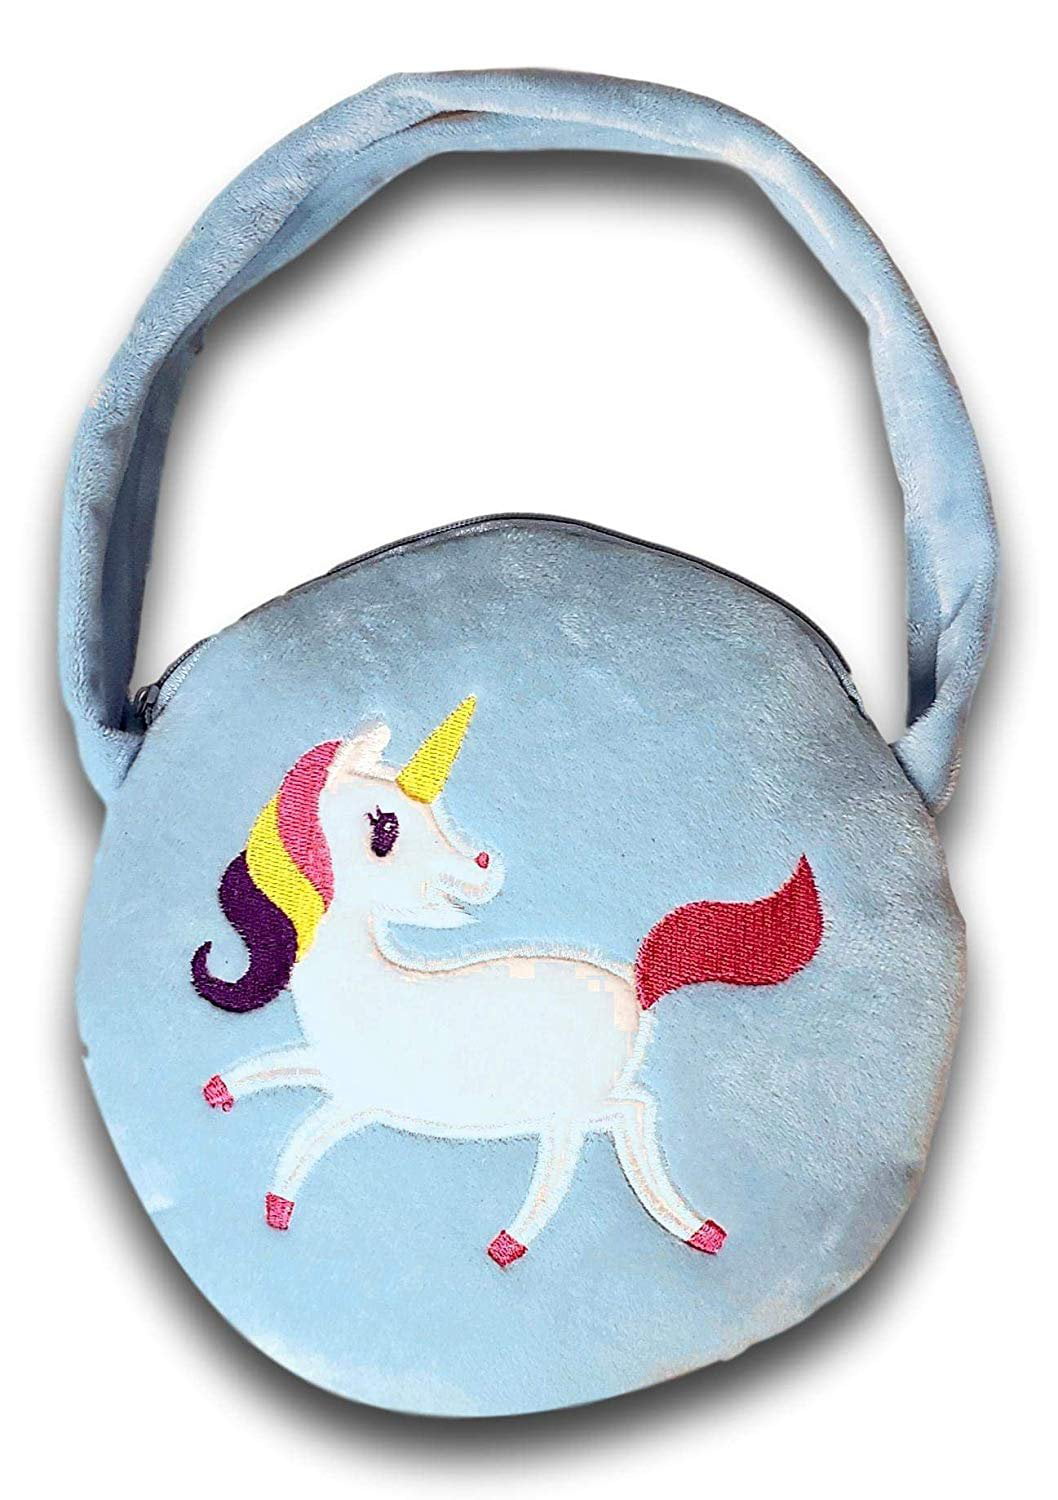 Adorable Unicorn Shoulder Bag For Girls Mini Handbag With Keys, Unicorn  Coin Purse, And Cute Animal Design From Luxurybags2, $14.62 | DHgate.Com